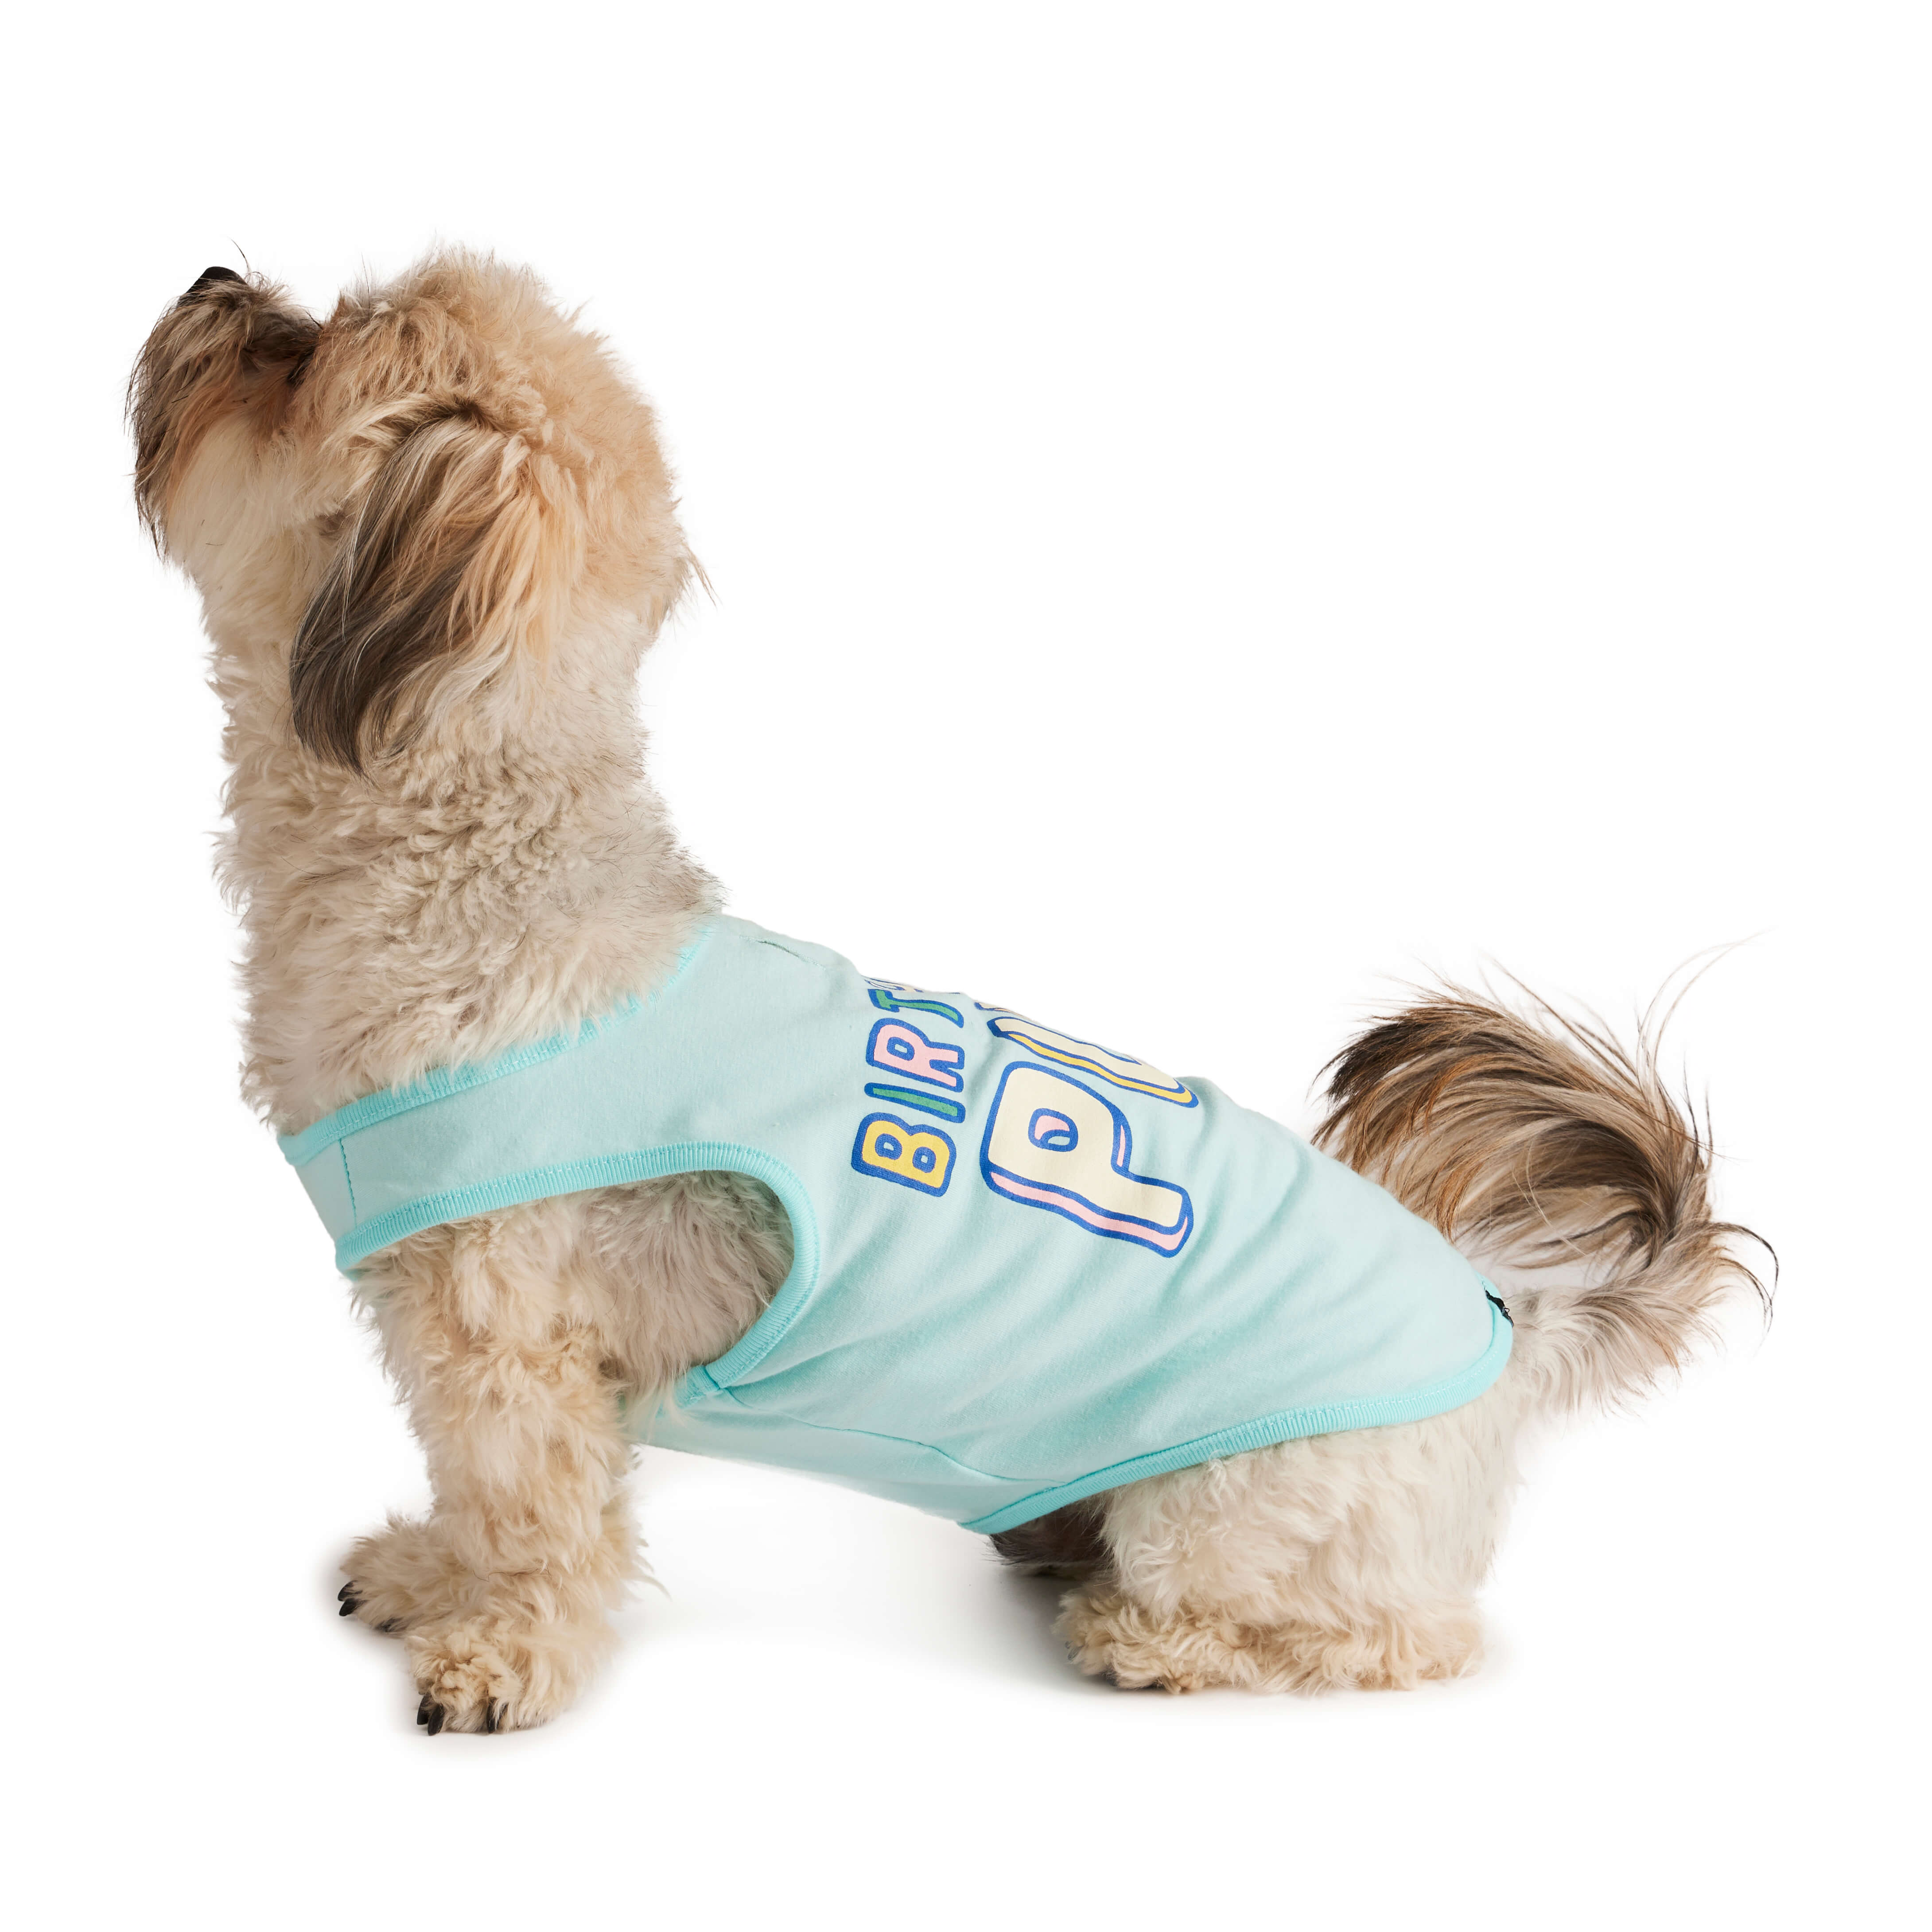 hotel doggy thread collective dog tank top birthday pup blue